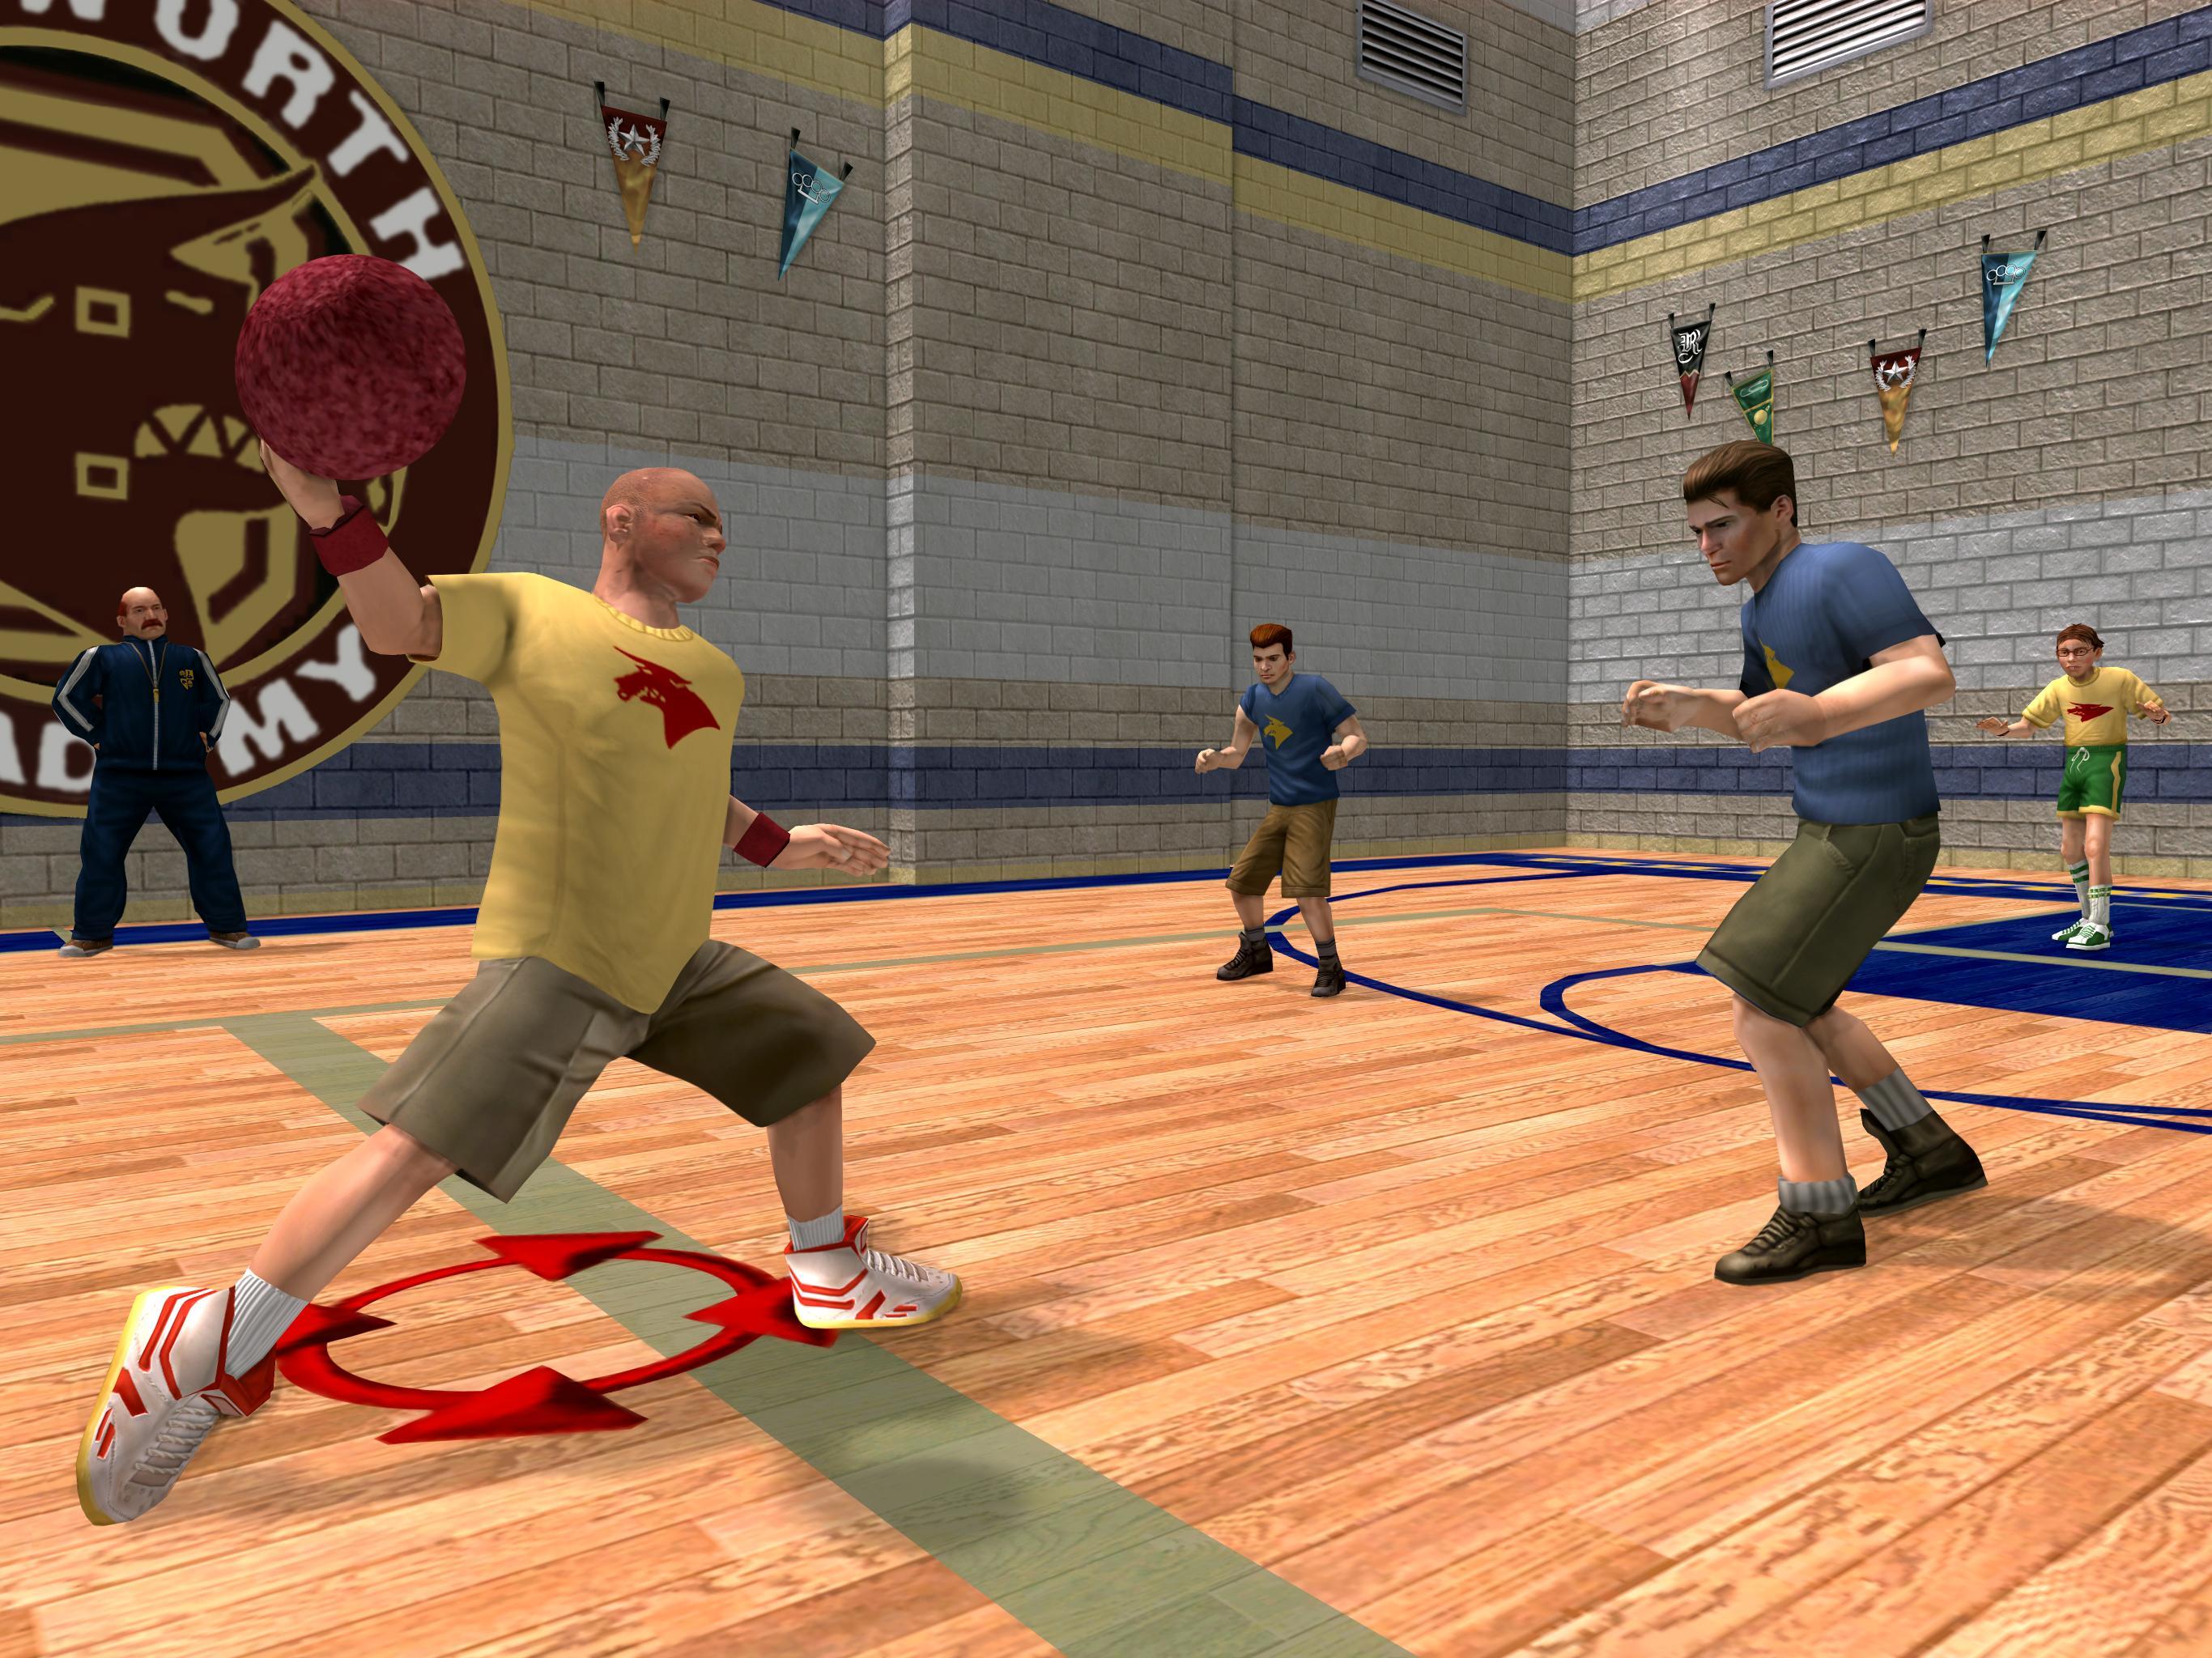 Bully Anniversary Edition Available now on iOS and Android